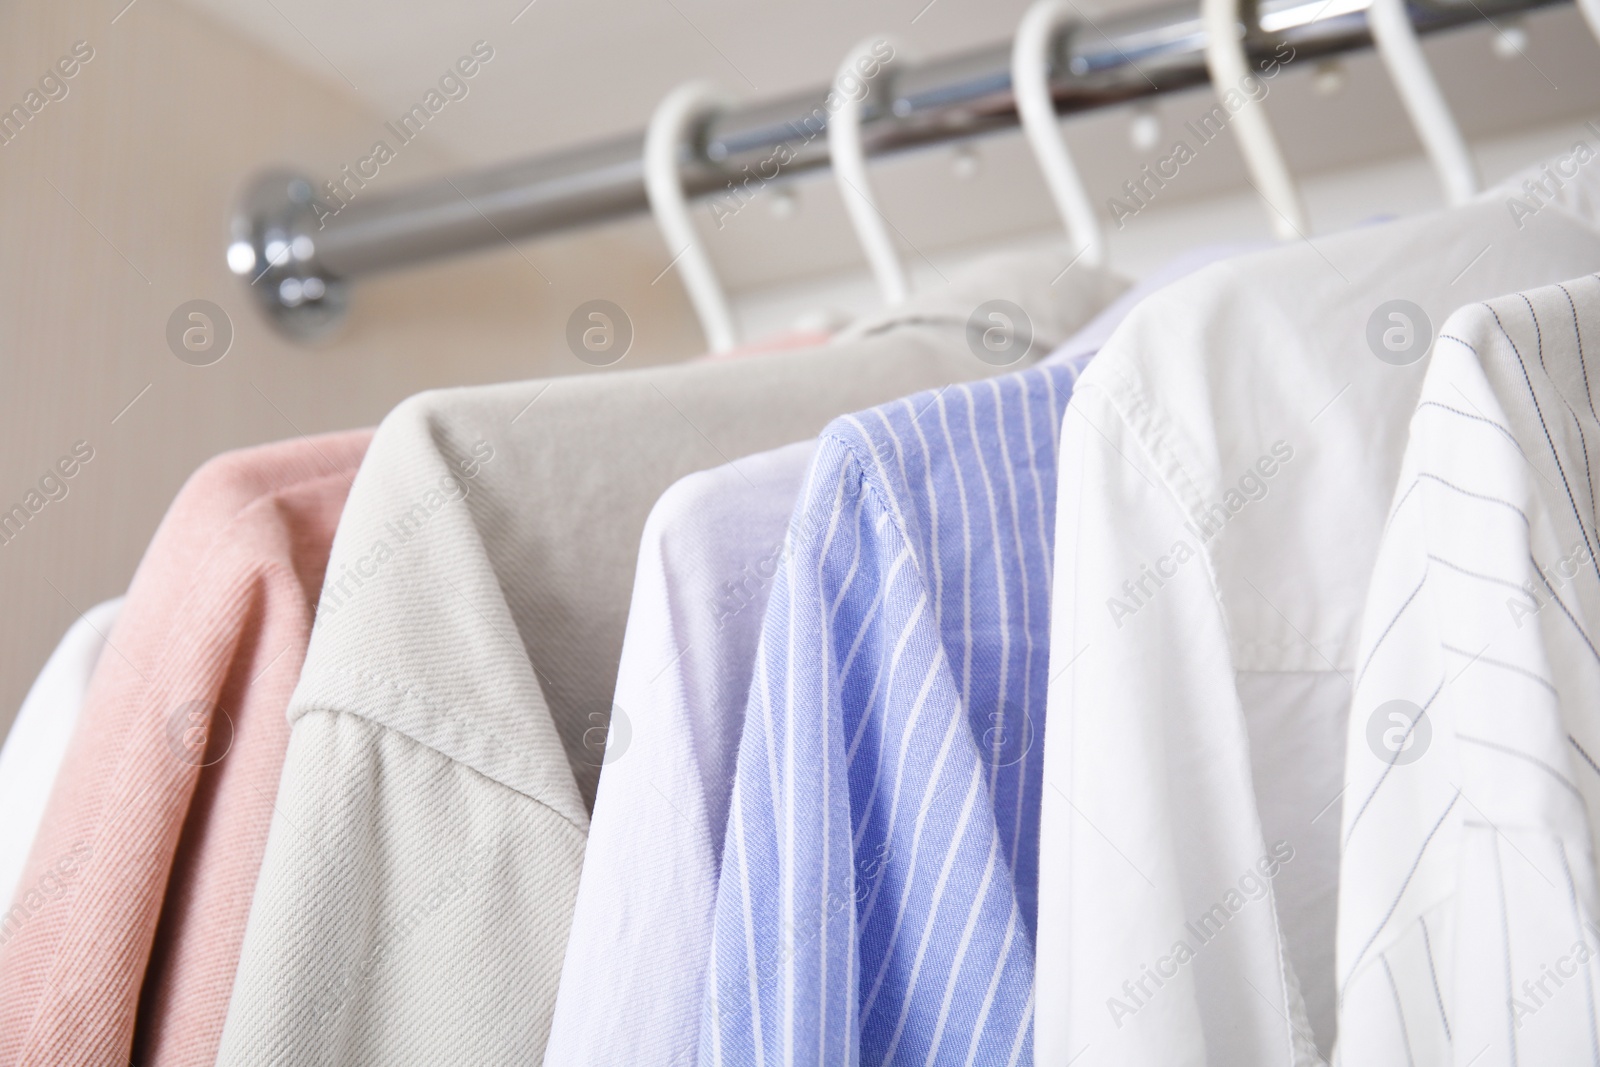 Photo of Collectionclothes in wardrobe, closeup view